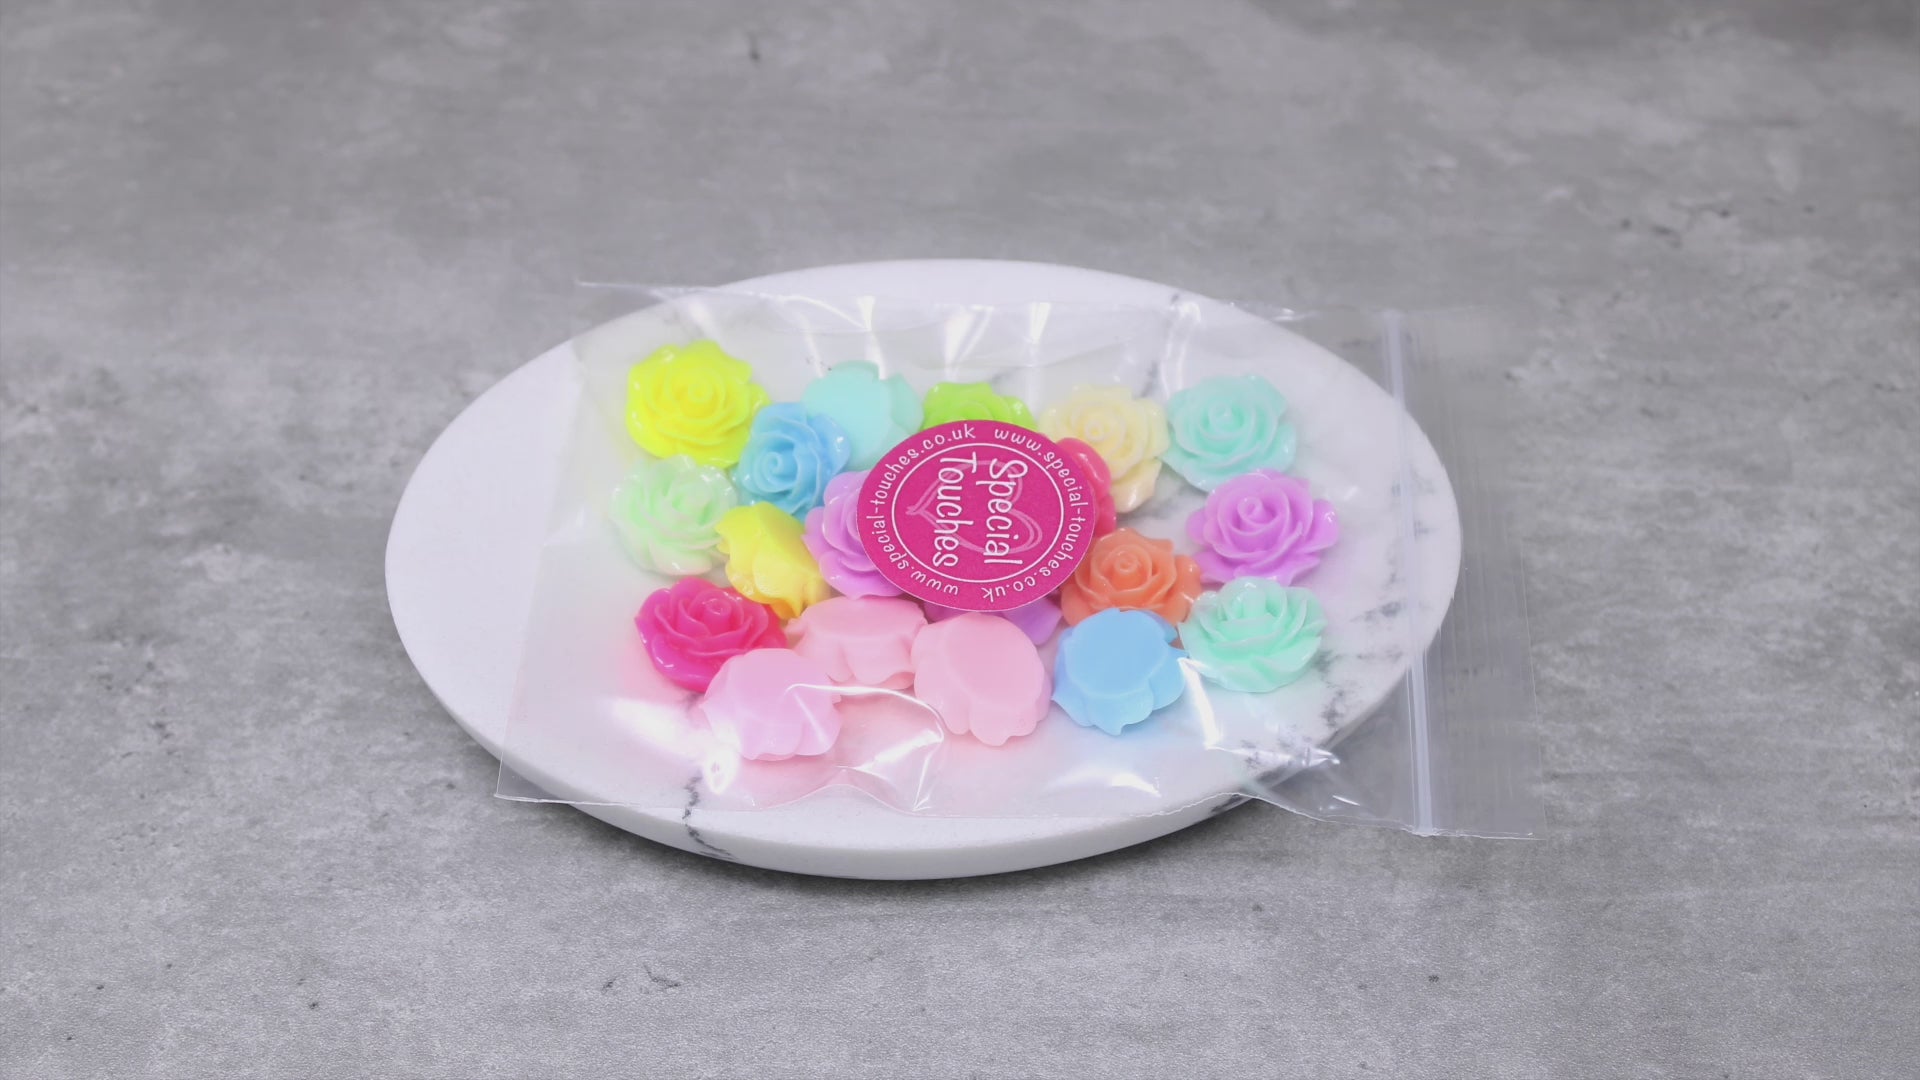 Add a touch of timeless elegance to your crafting endeavors with these shabby chic resin rose flatbacks. With an intricately detailed design and a delightful rose shape, these flatbacks are an essential addition to any creative project.